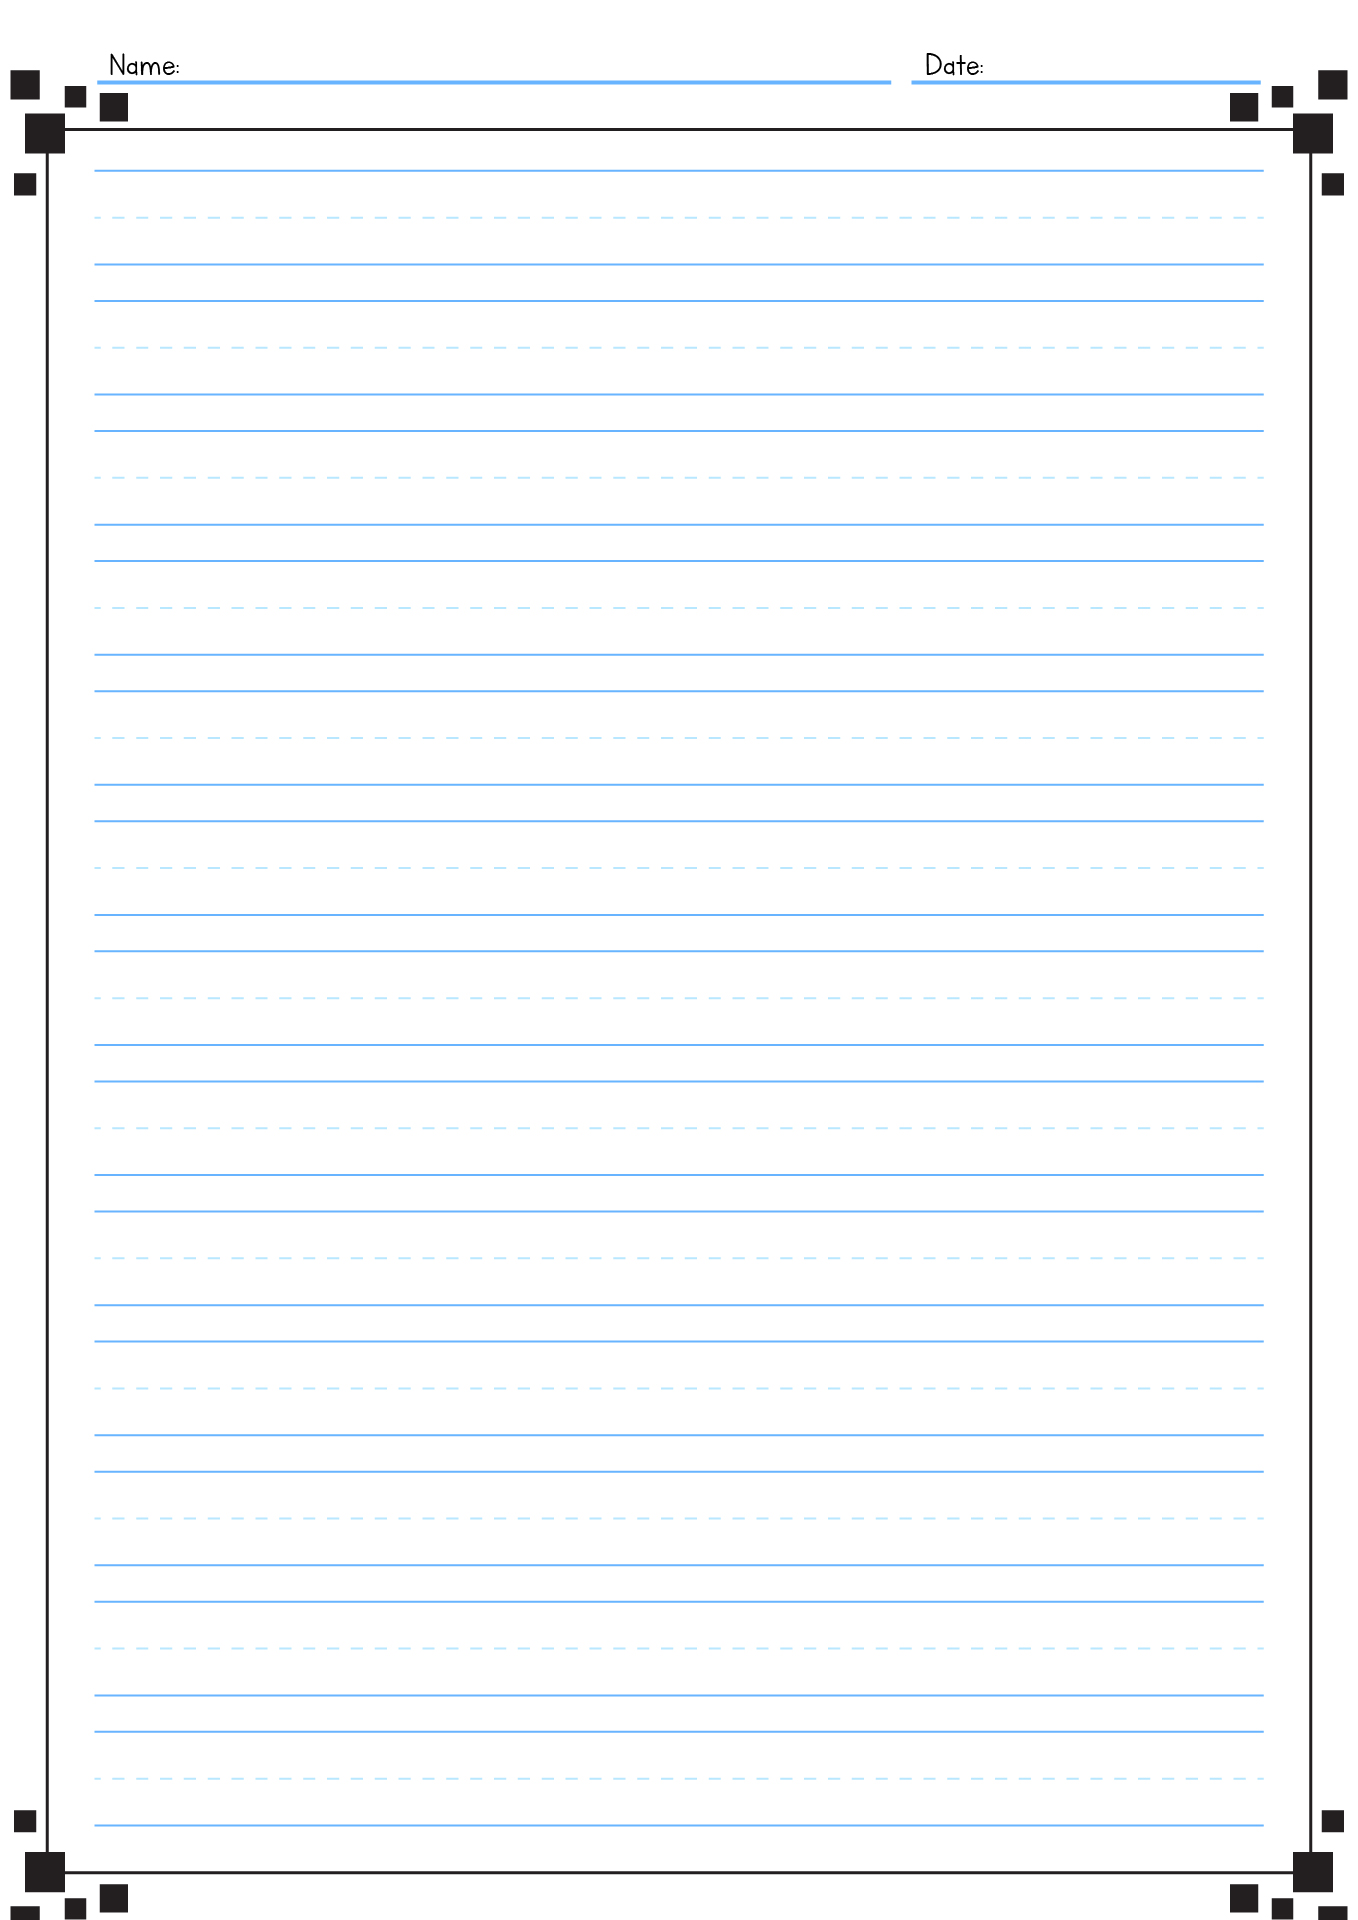 15 Best Images of Long Lined Paper Worksheets 4th Grade ...